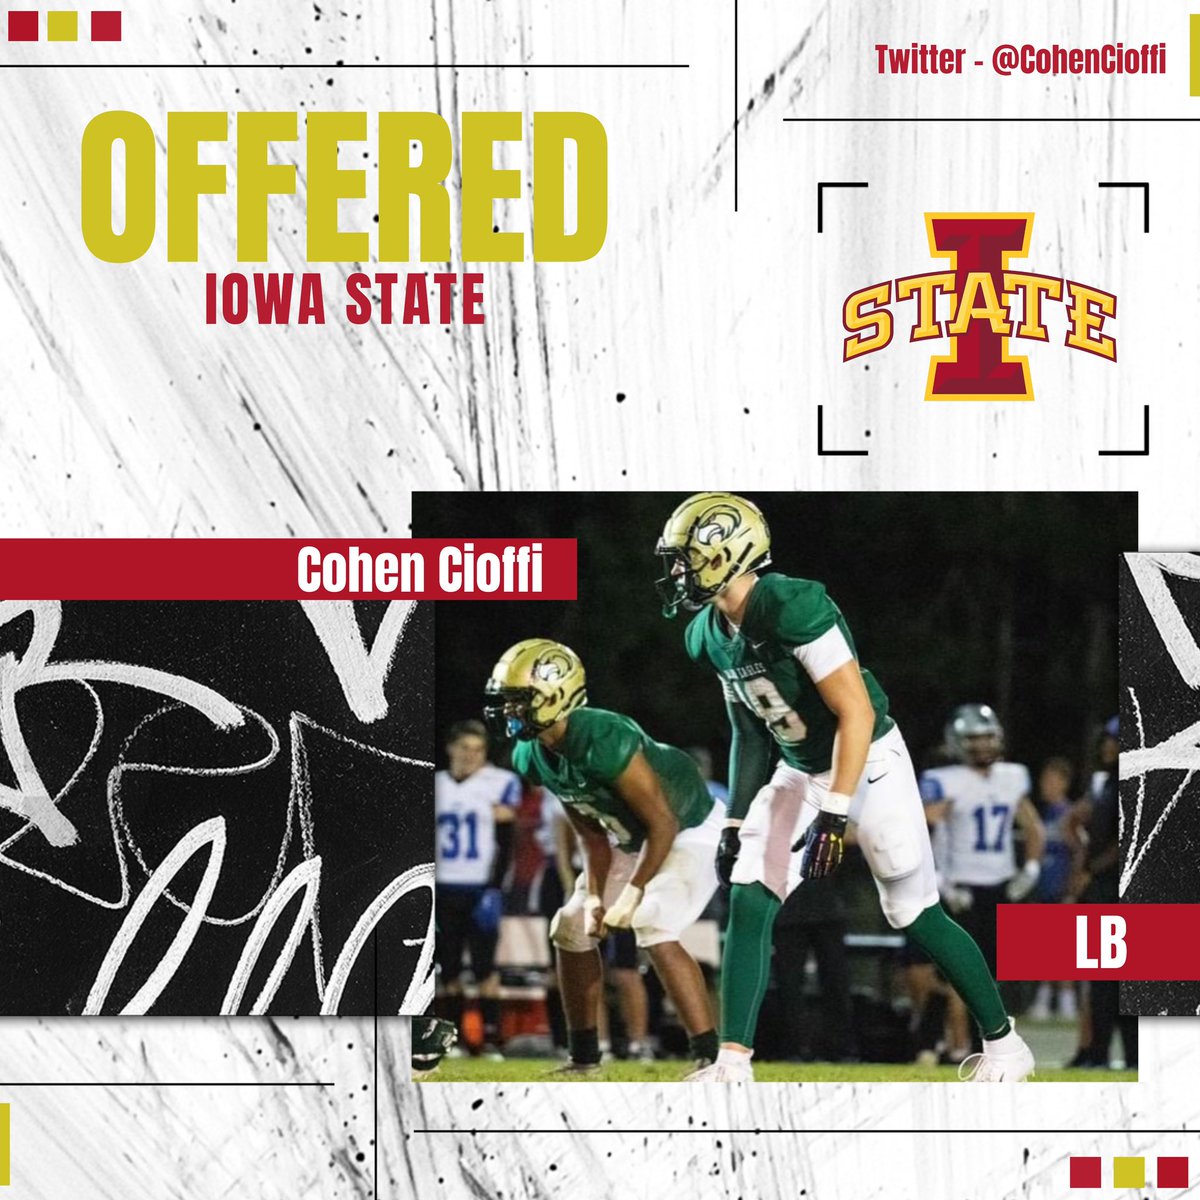 Congratulations to @FIHSFOOTBALL 2026 LB @CohenCioffi for receiving his first offer from @CycloneFB #RecruitTheIsland #SoarHigher